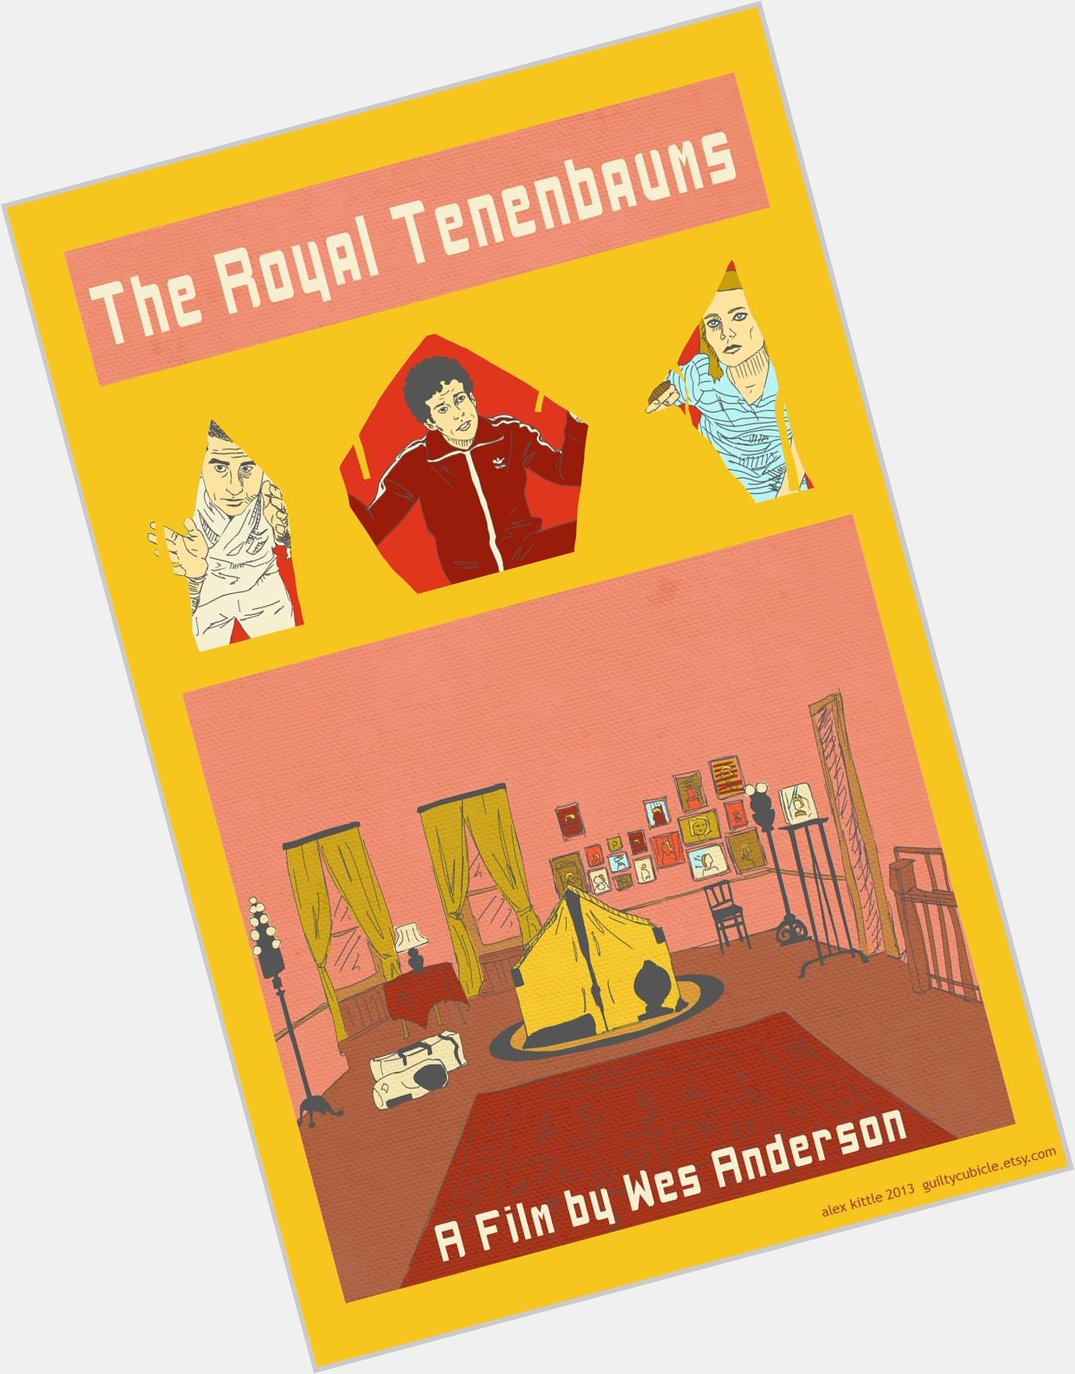 Happy birthday Wes Anderson! I think his best movie is The Royal Tenenbaums because it makes me cry the most obvi 